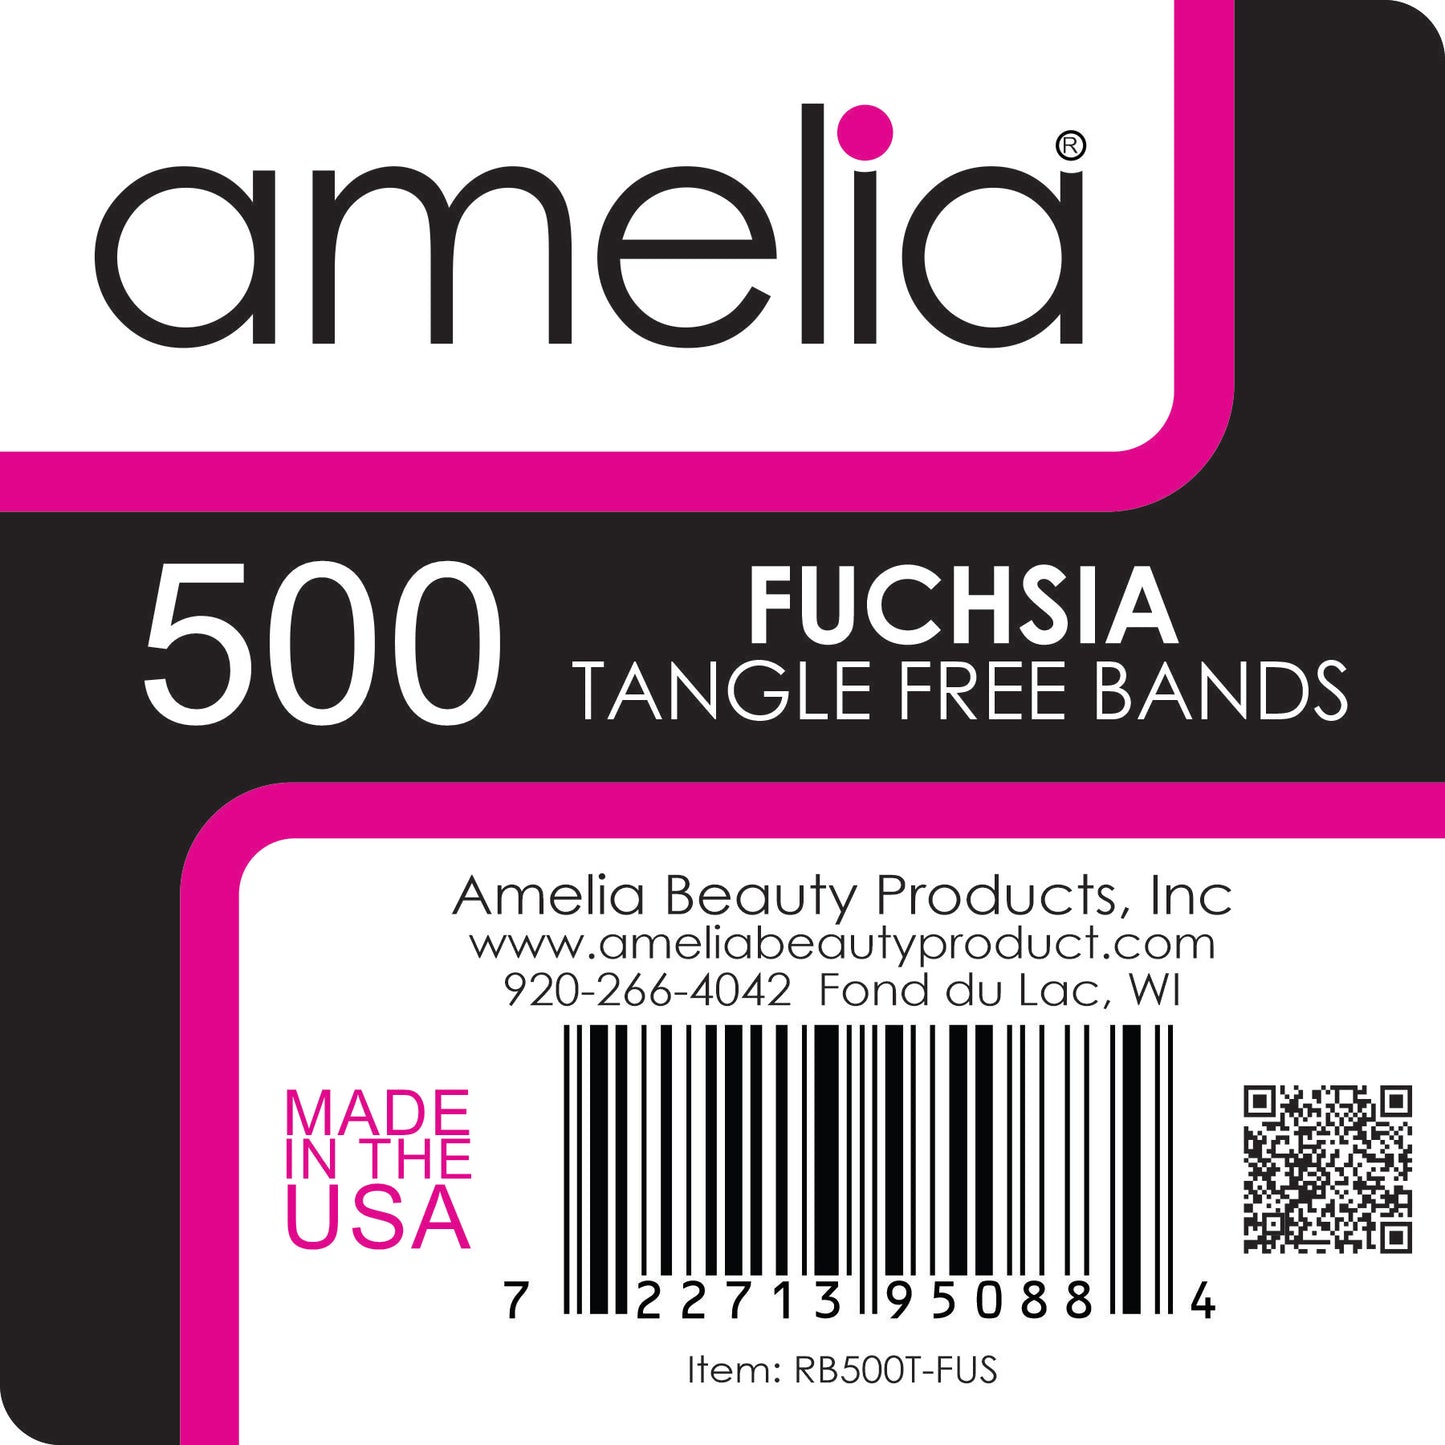 Amelia Beauty | 1/2in, Fuchsia, Tangle Free Elastic Pony Tail Holders | Made in USA, Ideal for Ponytails, Braids, Twists. For Women, Girls. Pain Free, Snag Free, Easy Off | 500 Pack